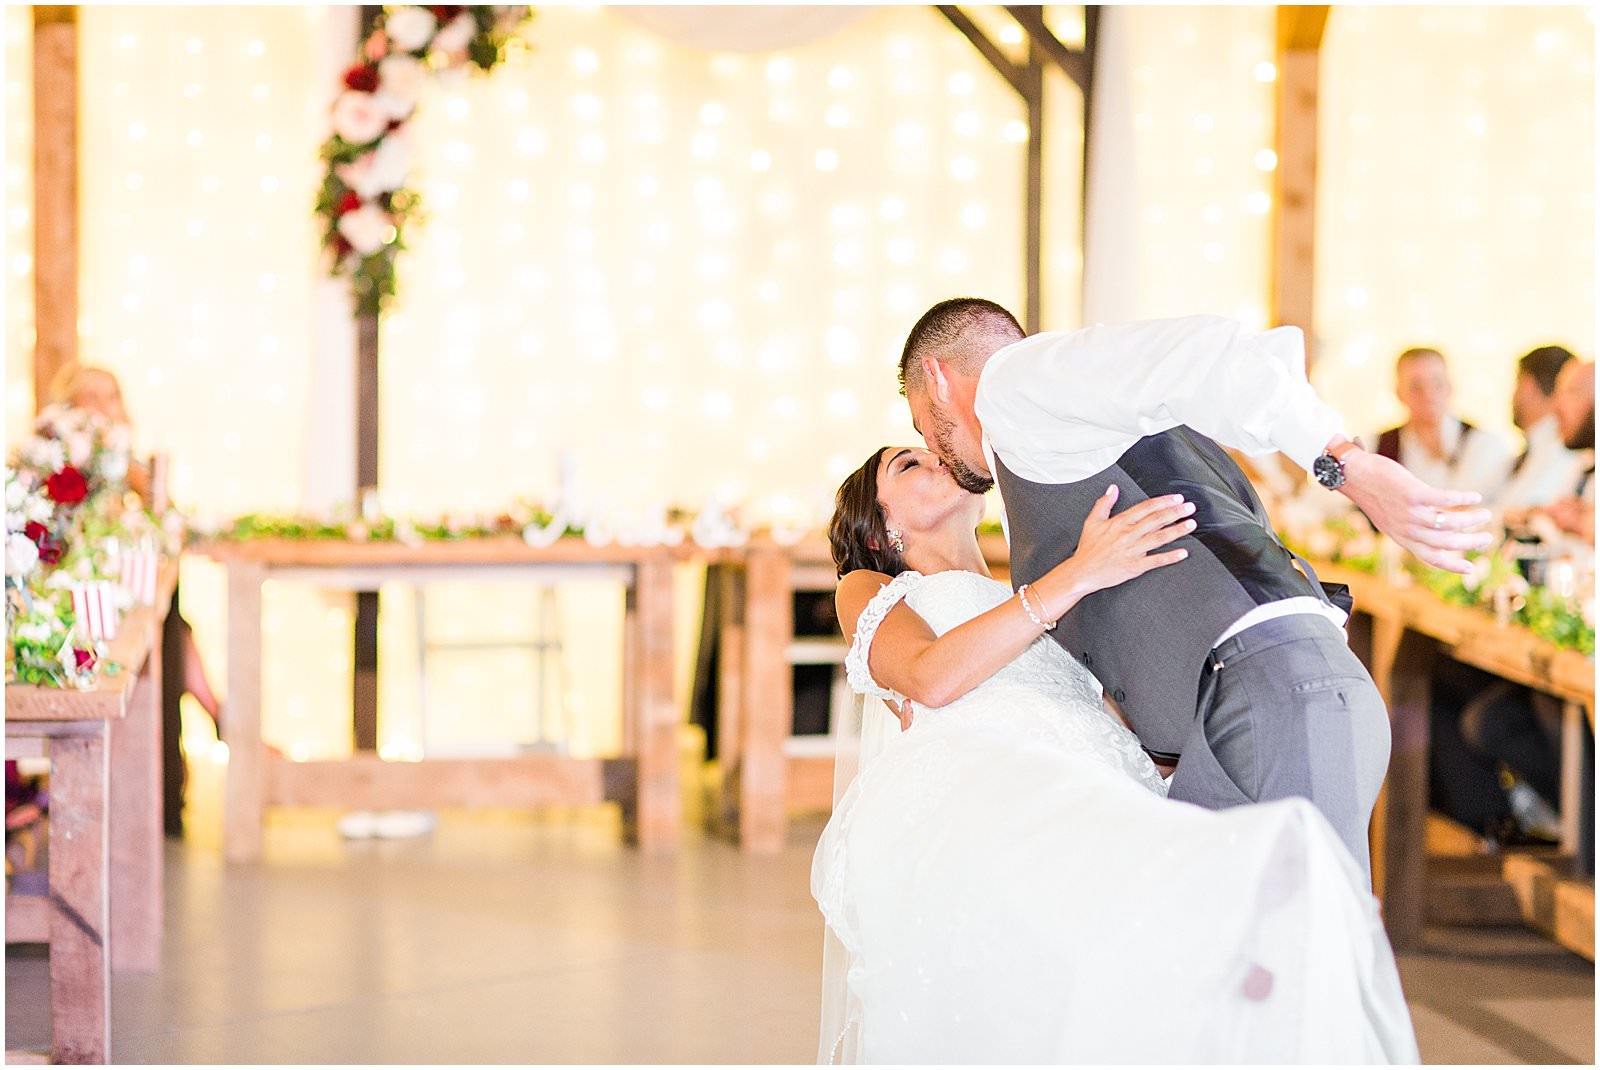 A Stunning Fall Wedding in Indianapolis, IN |. Sally and Andrew | Bret and Brandie Photography 0115.jpg